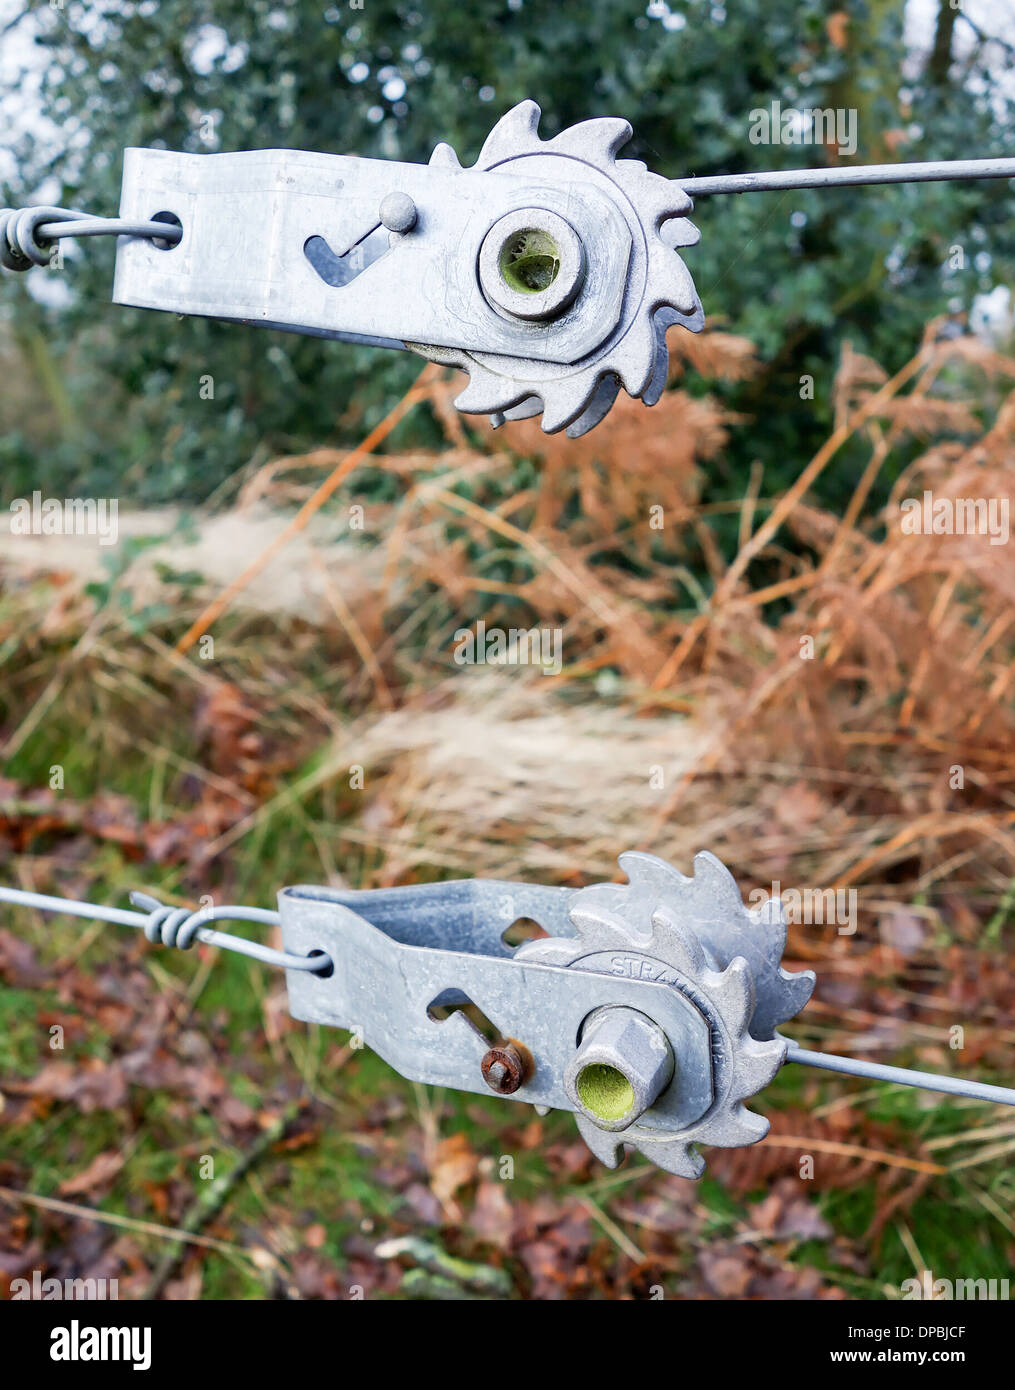 Wire fence ratchet type tensioner used to join two ends of the wire together Stock Photo